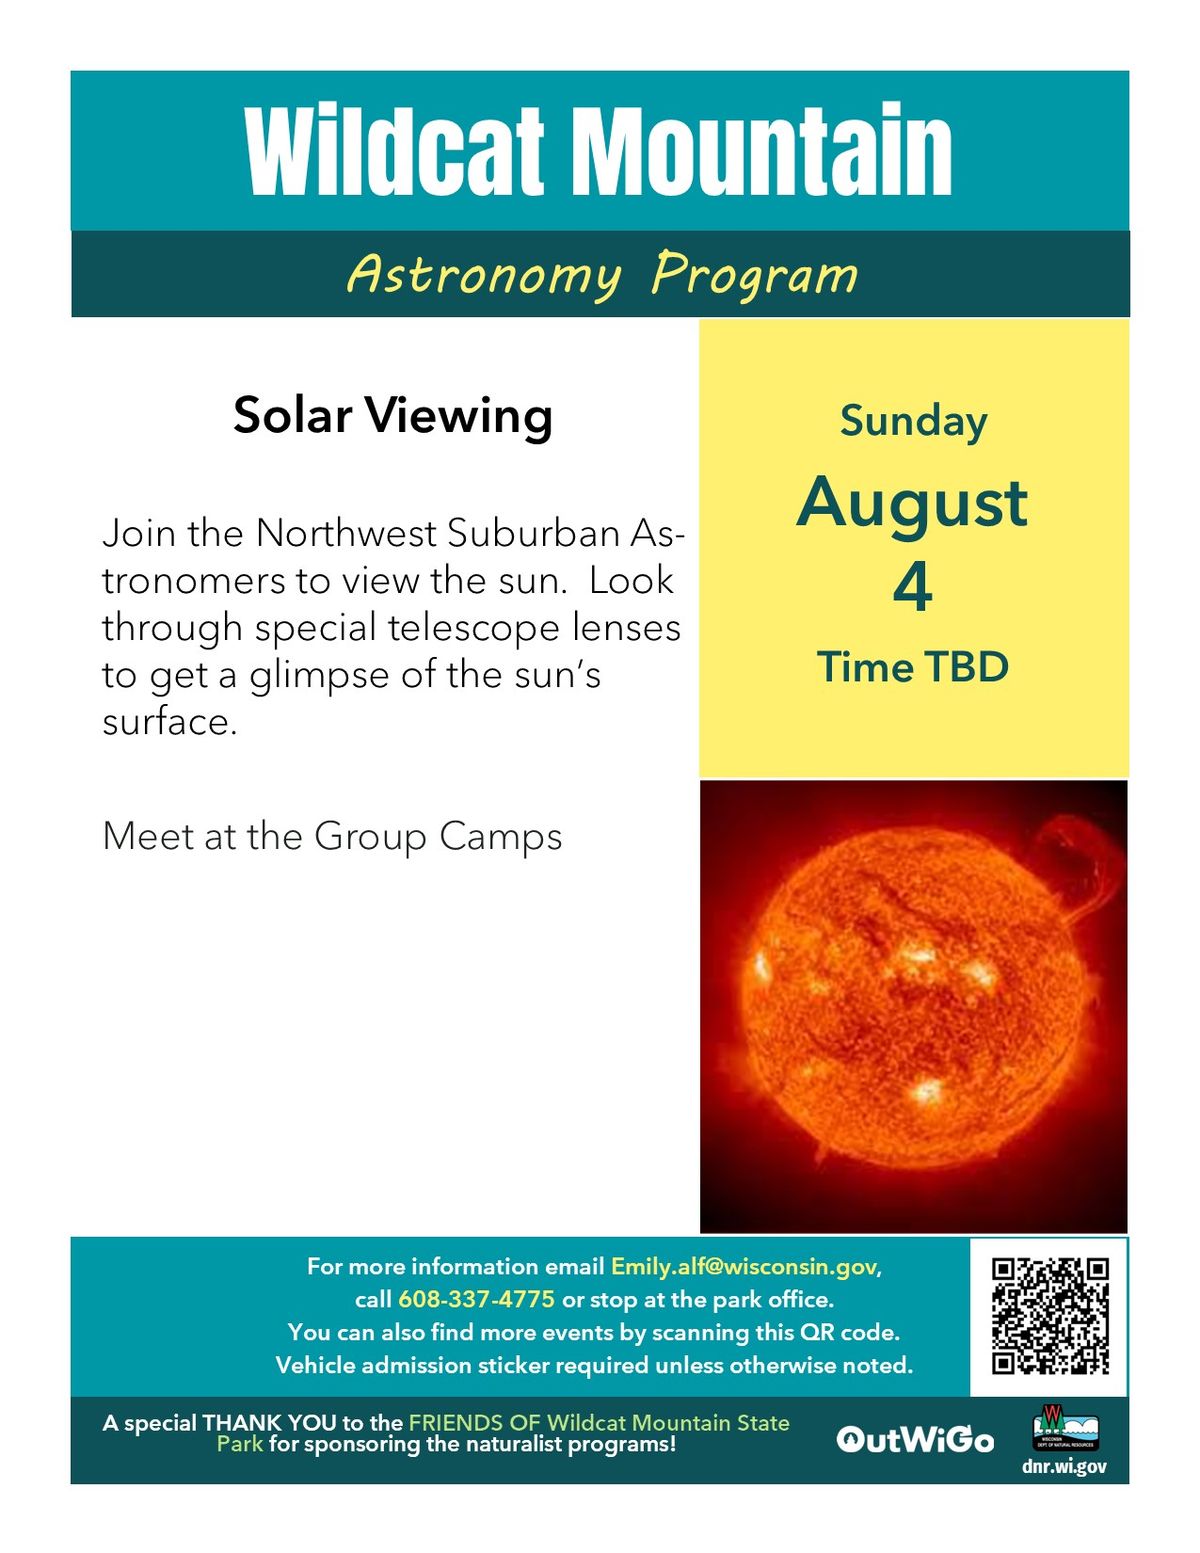 Solar Viewing with Northwest Suburban Astronomers